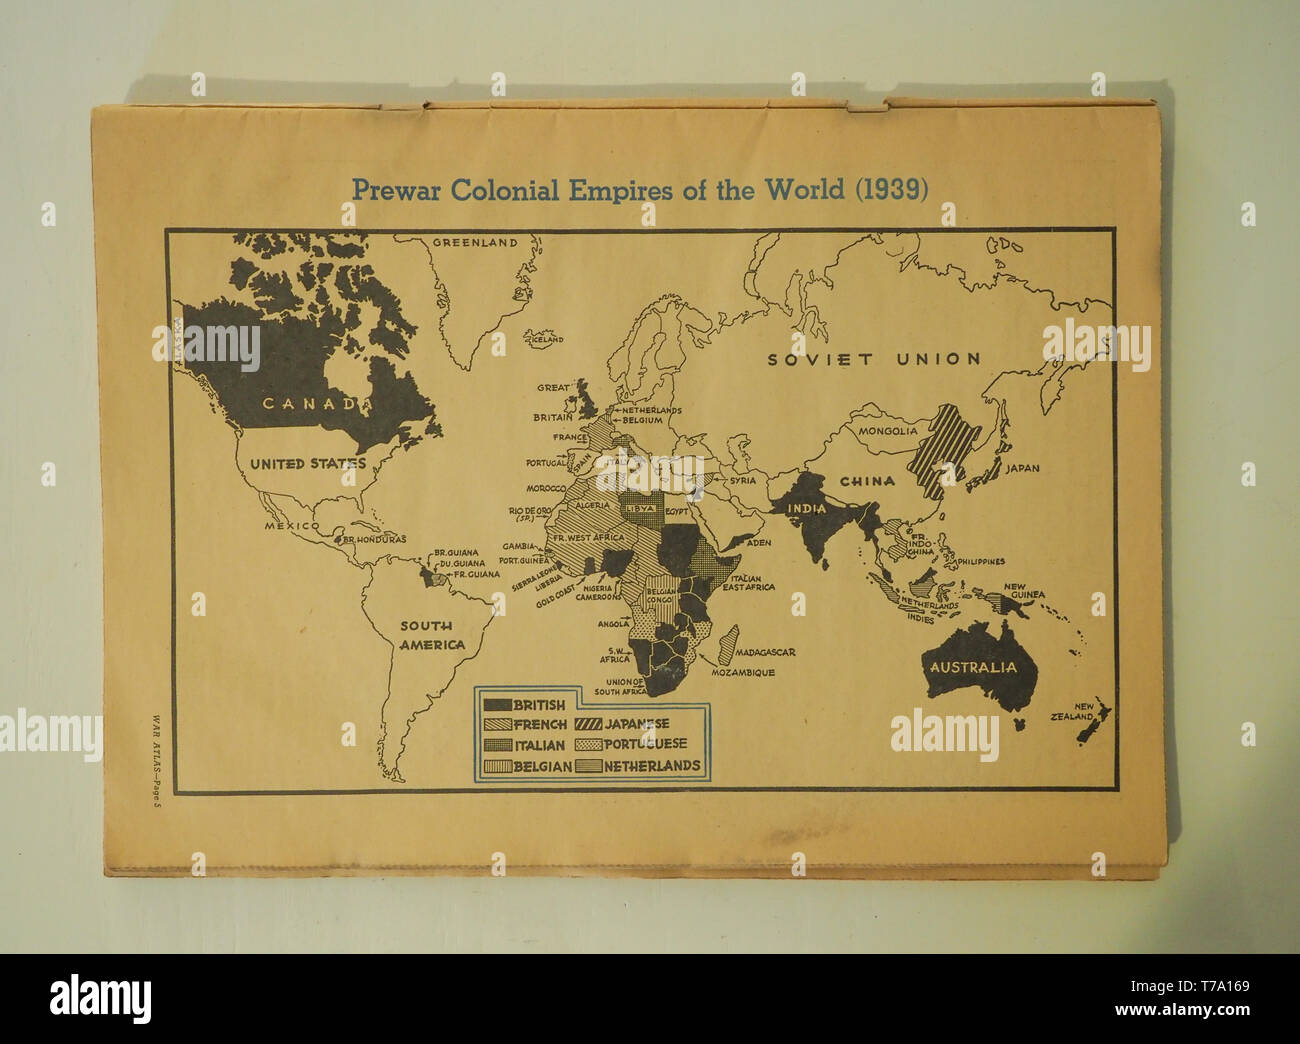 Editorial publication from January 2, 1943 showing the prewar colonial empires of the world as of 1939. The publication is from the American Education Stock Photo